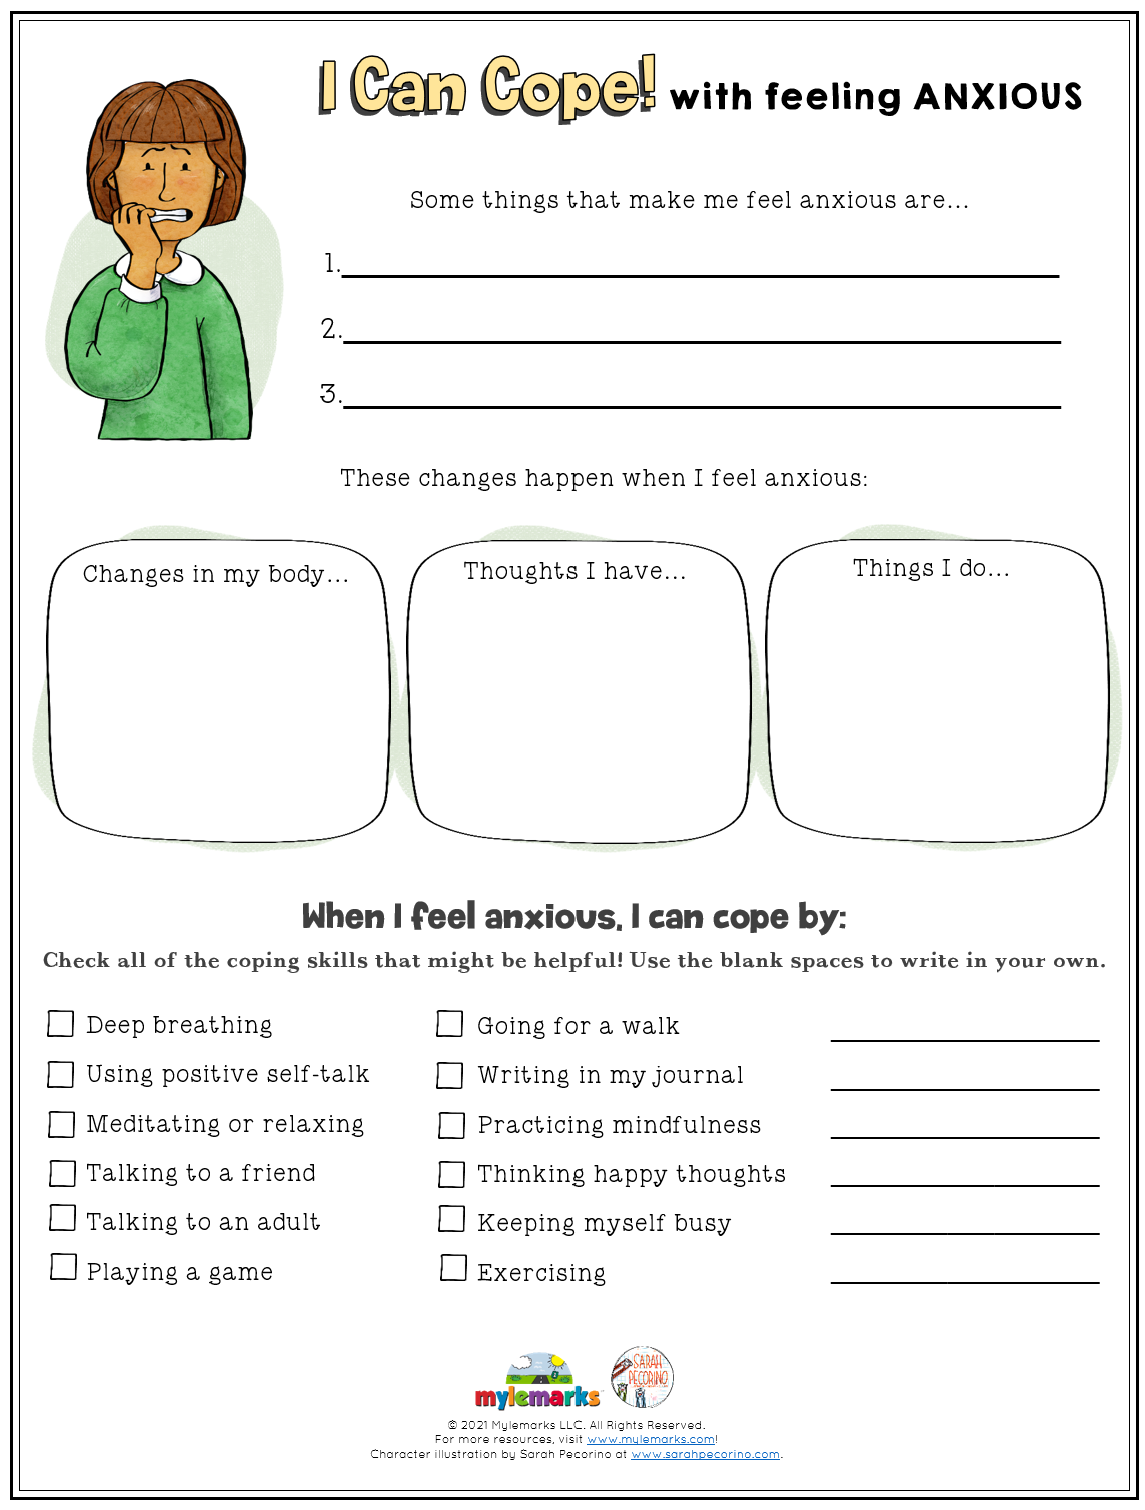 33 Coping With Anxiety Worksheets 65